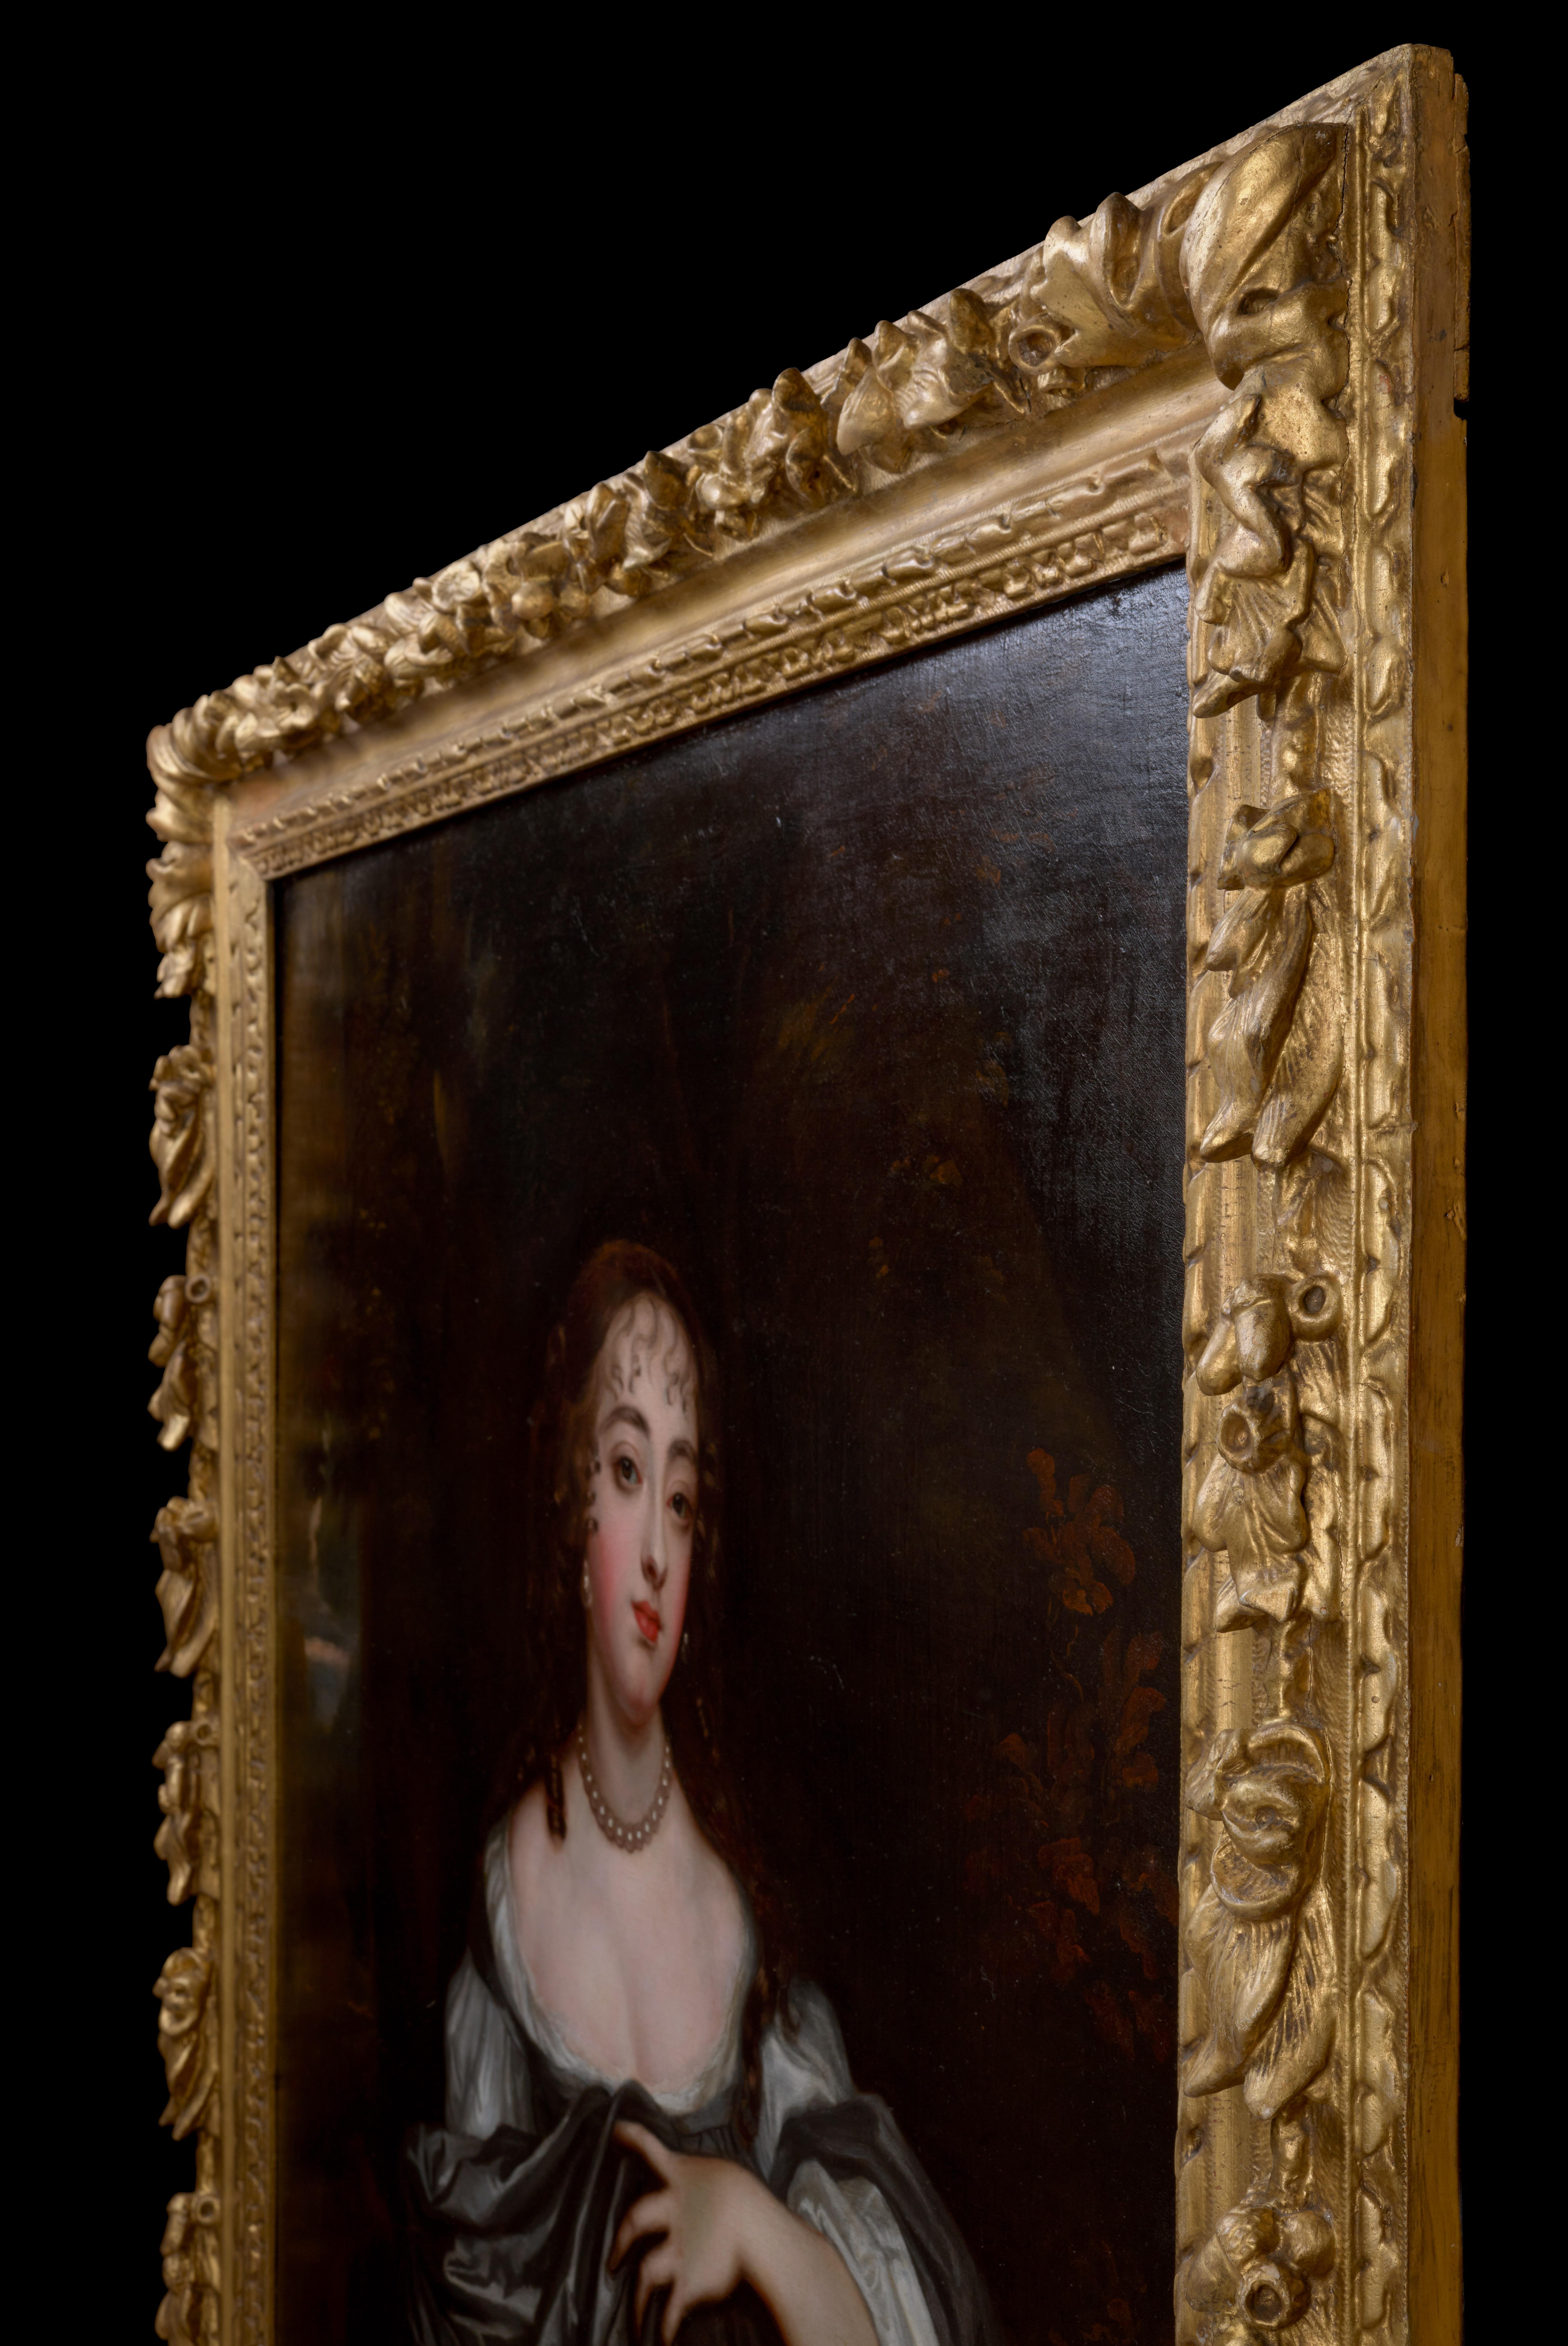 Portrait of Frances, Lady Whitmore nee Brooke (c.1638-1690)
Circle of Sir Peter Lely (1618-1680)

Titan Fine Art presents this exquisite portrait that depicts Frances Brooke, Lady Whitmore when she was around twenty-five years of age.  Depicted